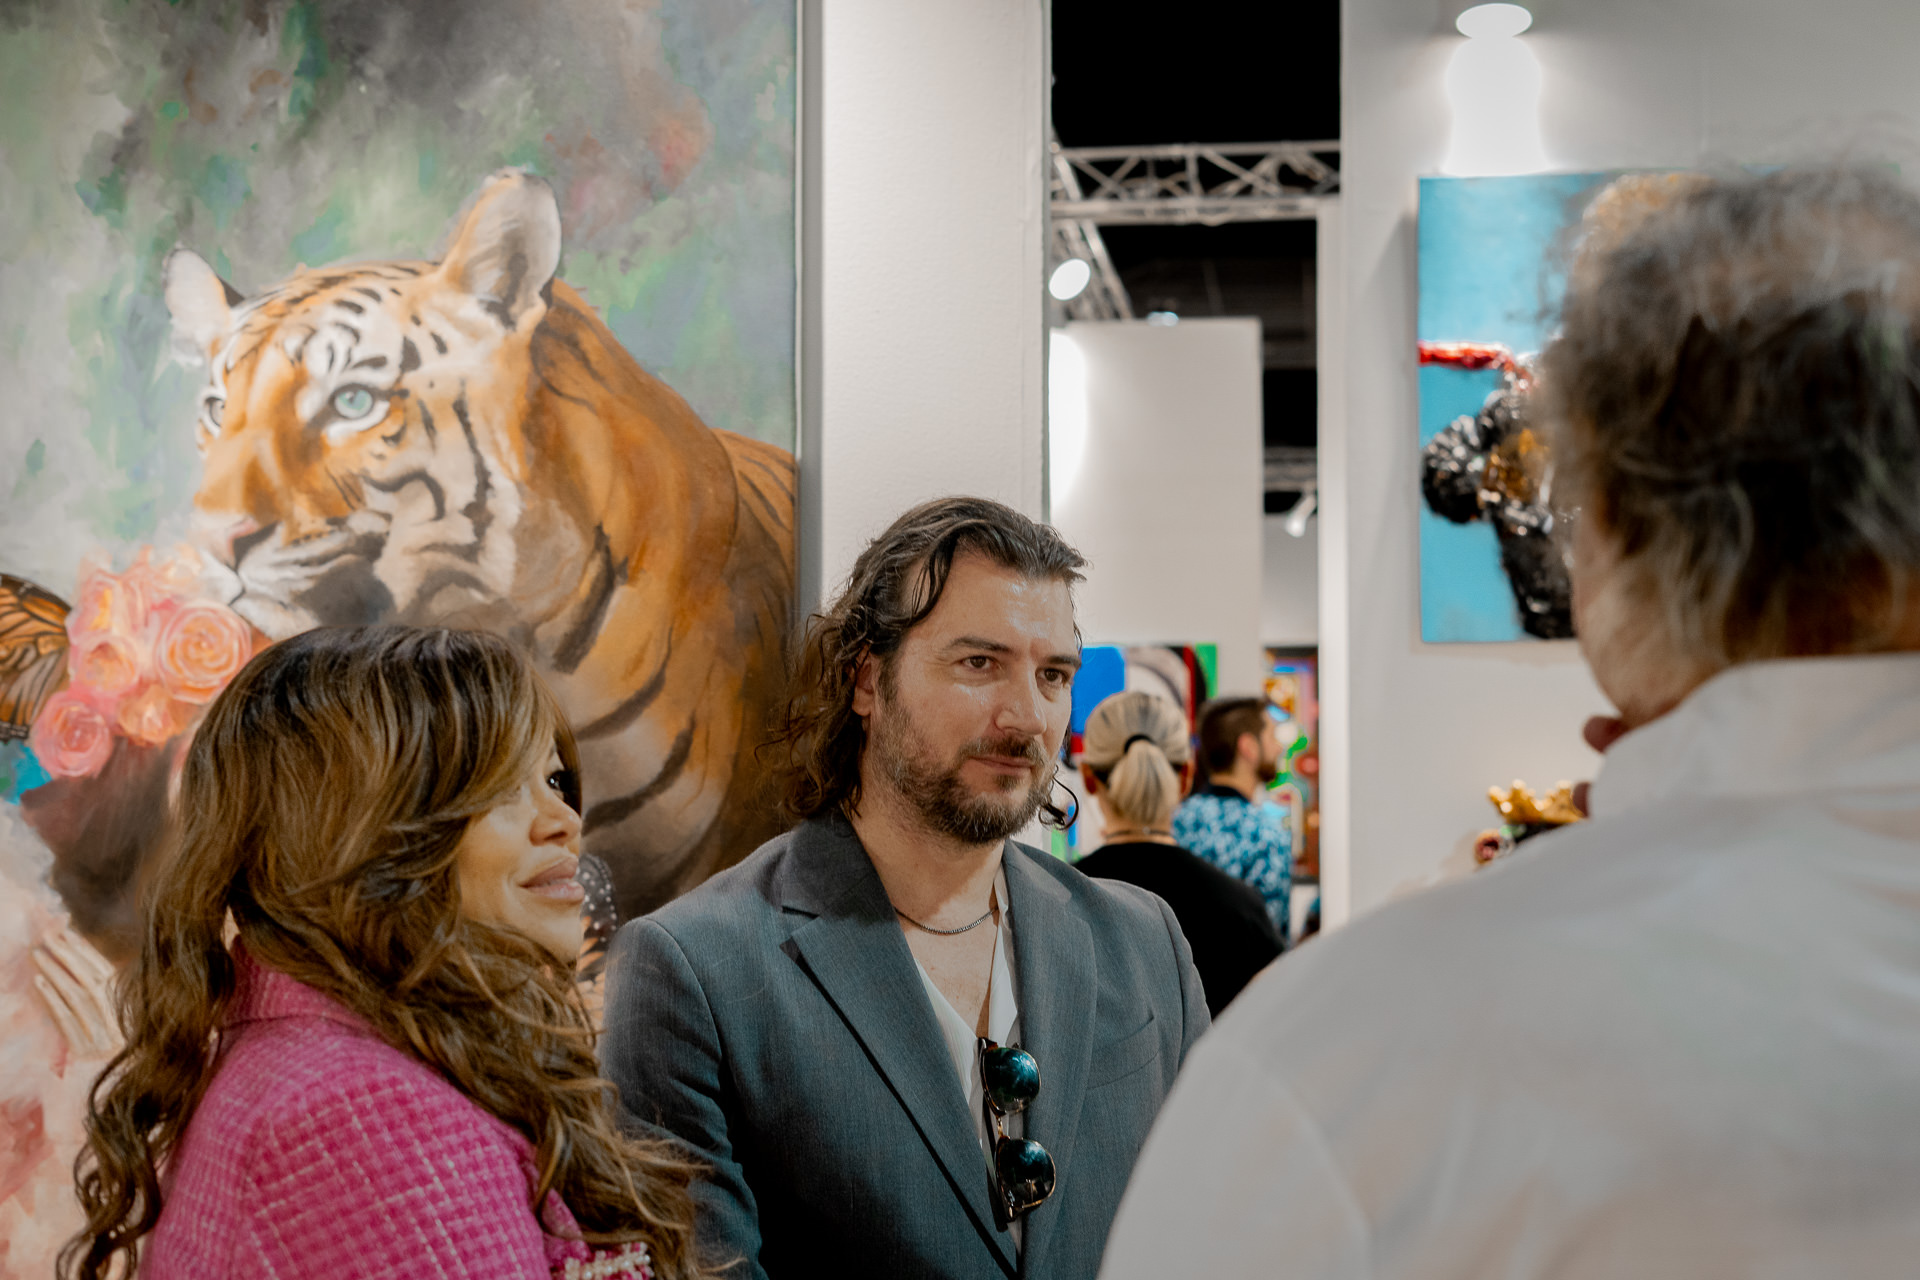 Artist Alex Righetto stands engaged with a group of attendees at Miami Art Week, with his painting 'The Guardian' adding a layer of artistic depth in the background.